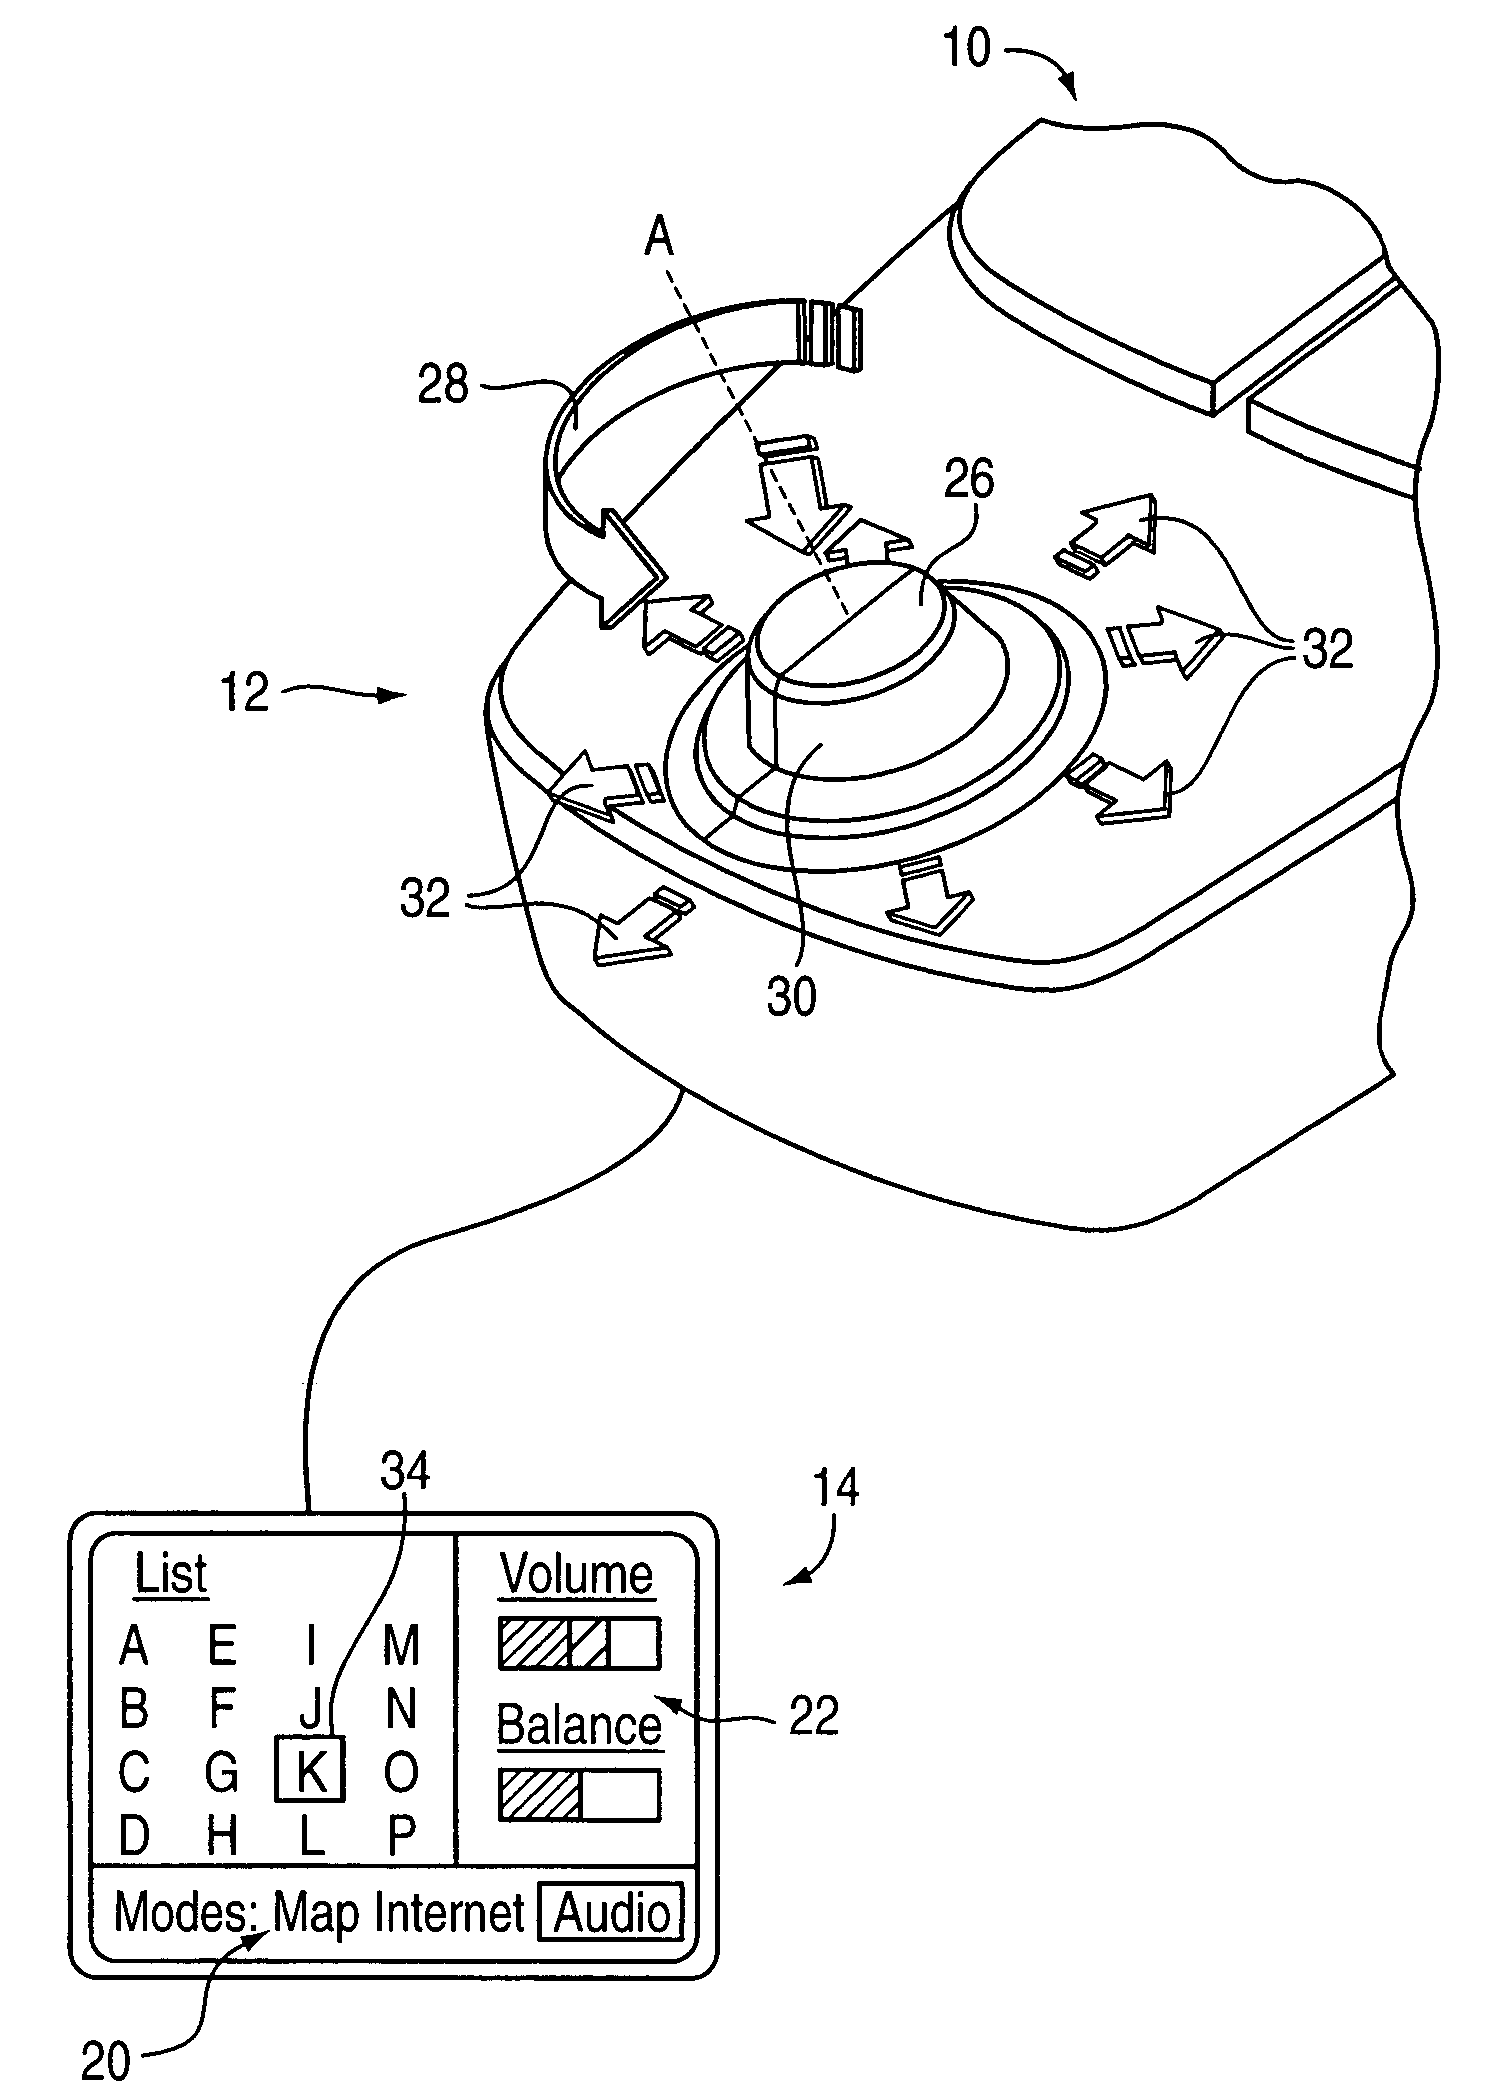 Haptic feedback effects for control knobs and other interface devices